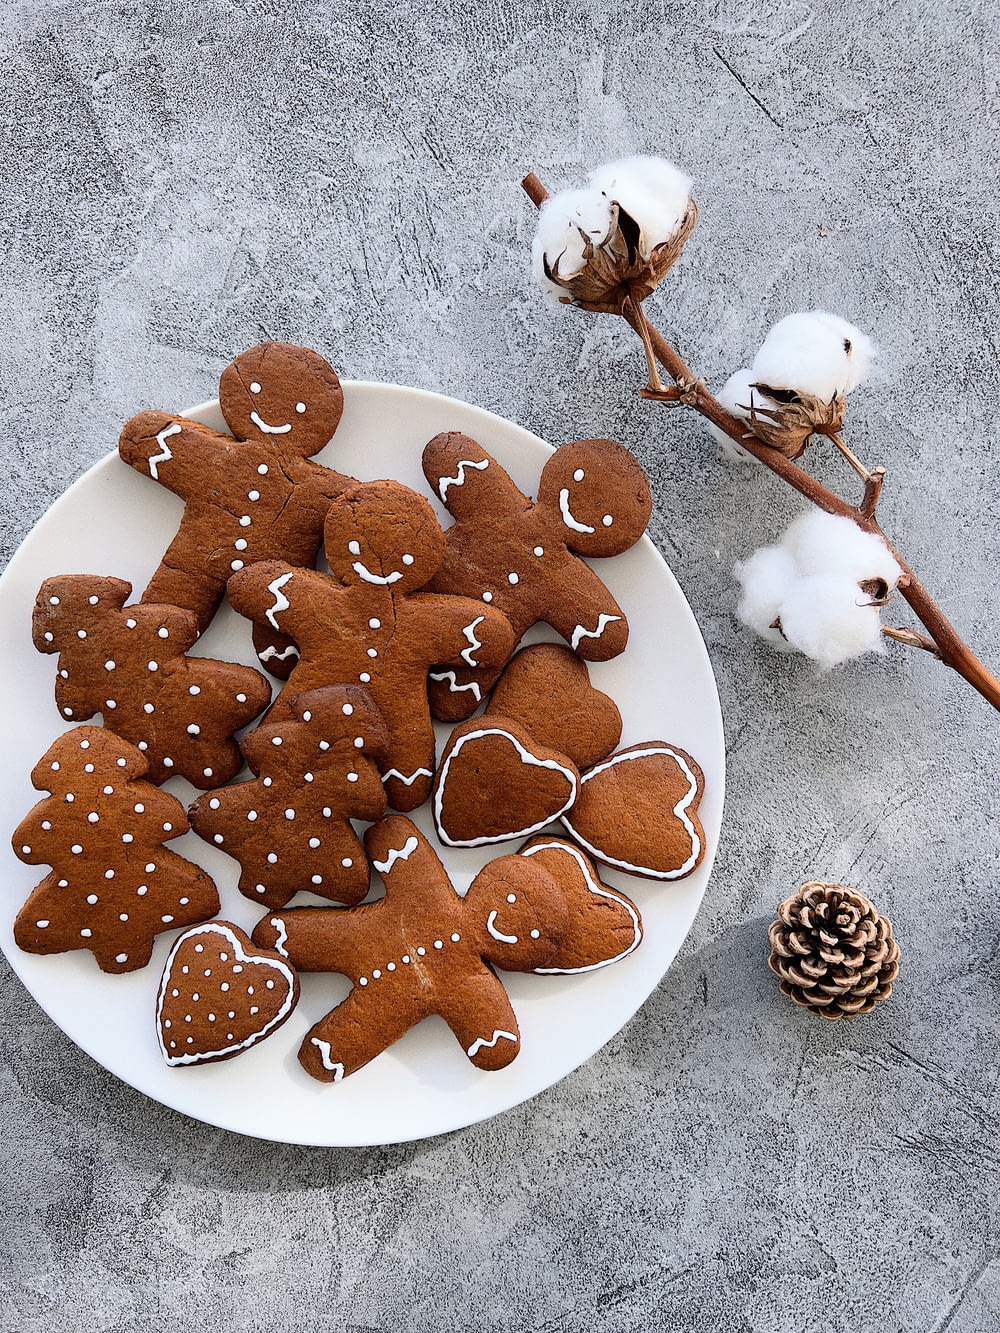 a plate of gingerbread cut - out cookies next to a cotton plant